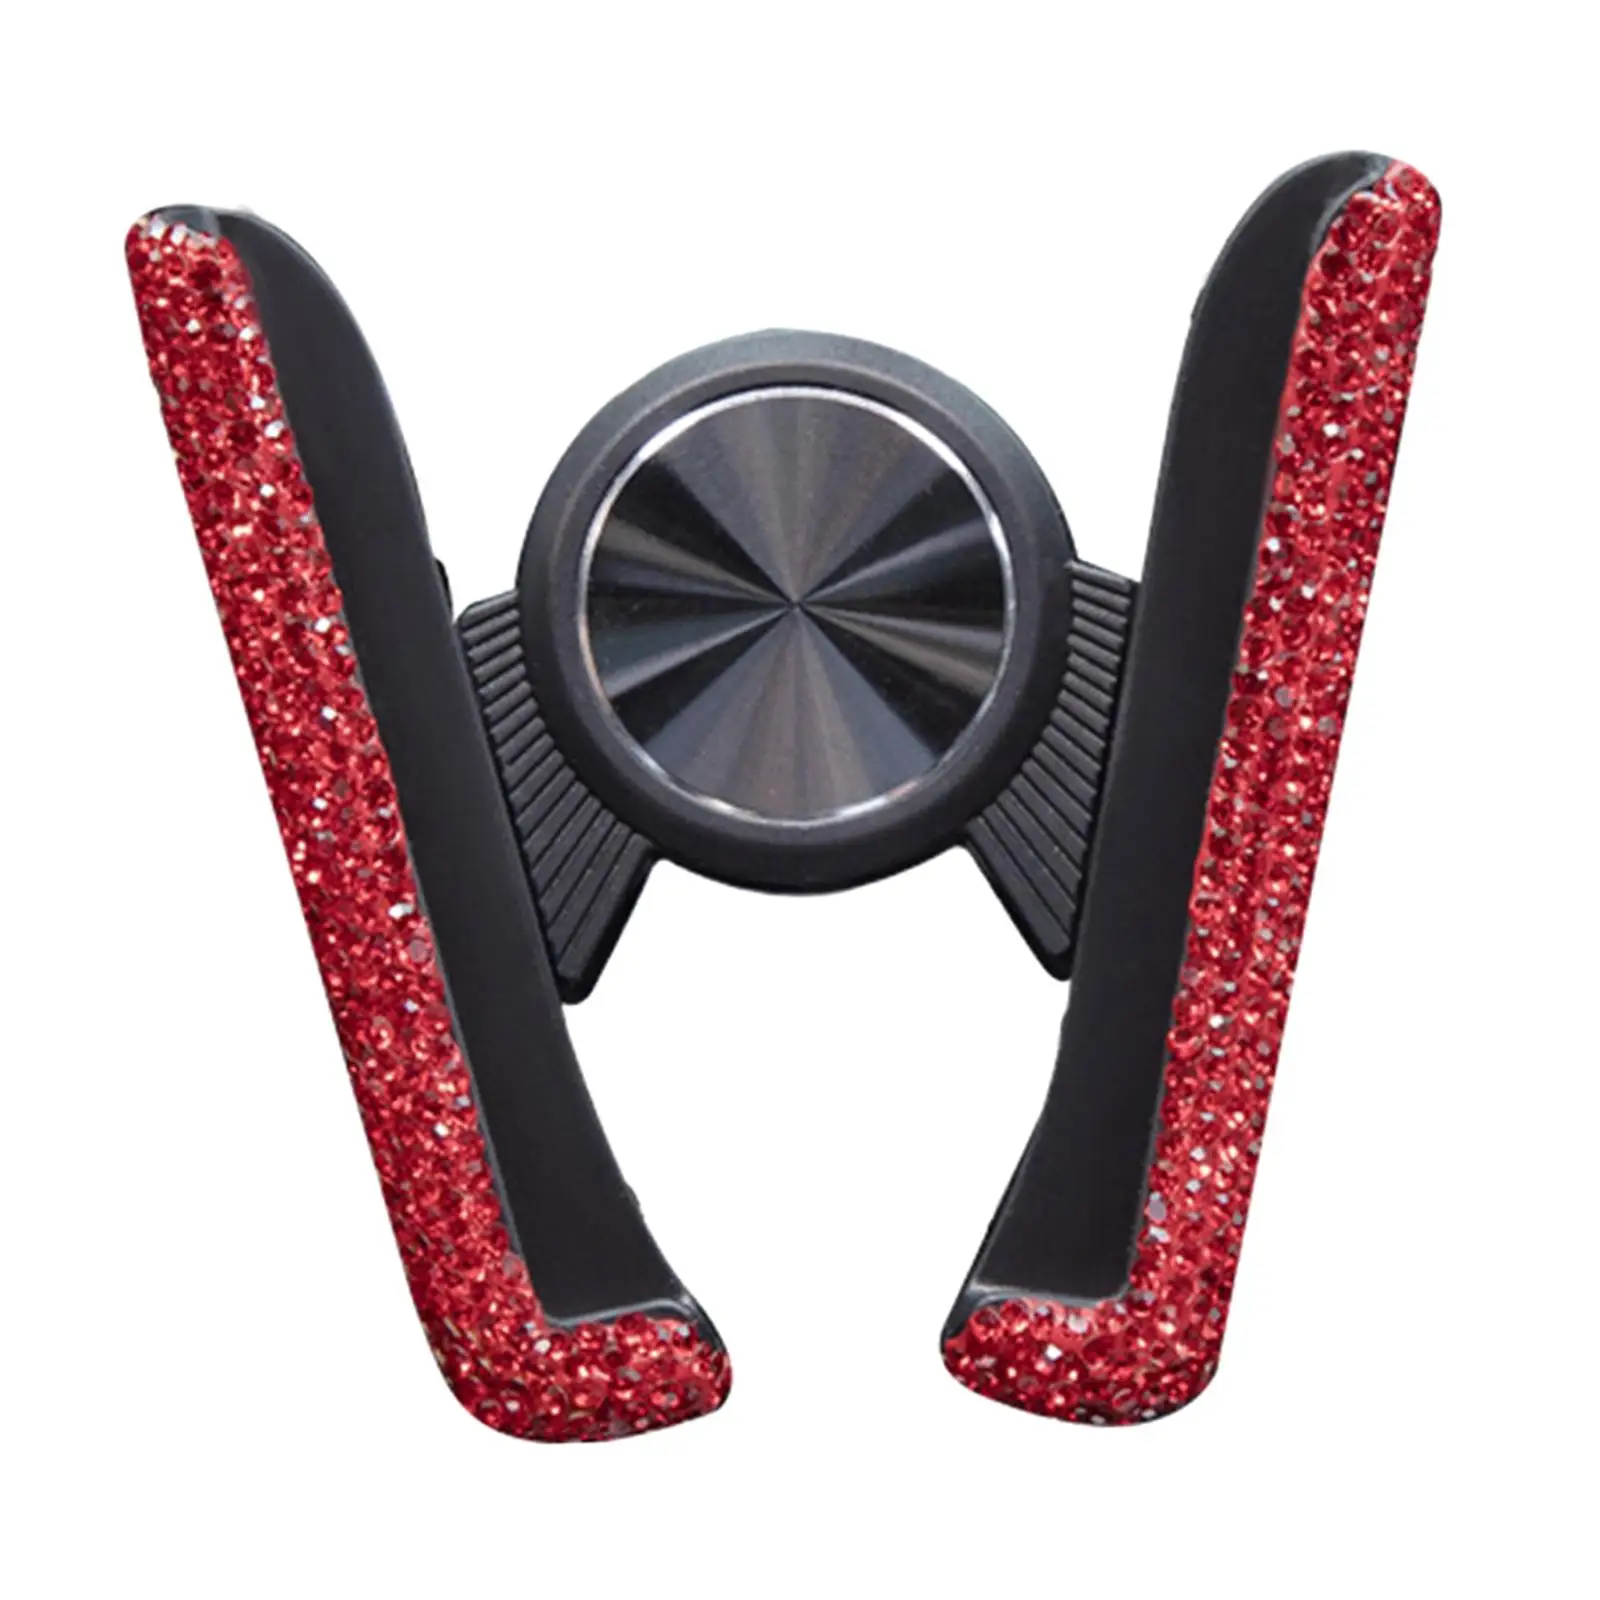 Car Phone Holder Mount 360 Rotating Convenient to Clamp for 4.7-6.5inch Size P